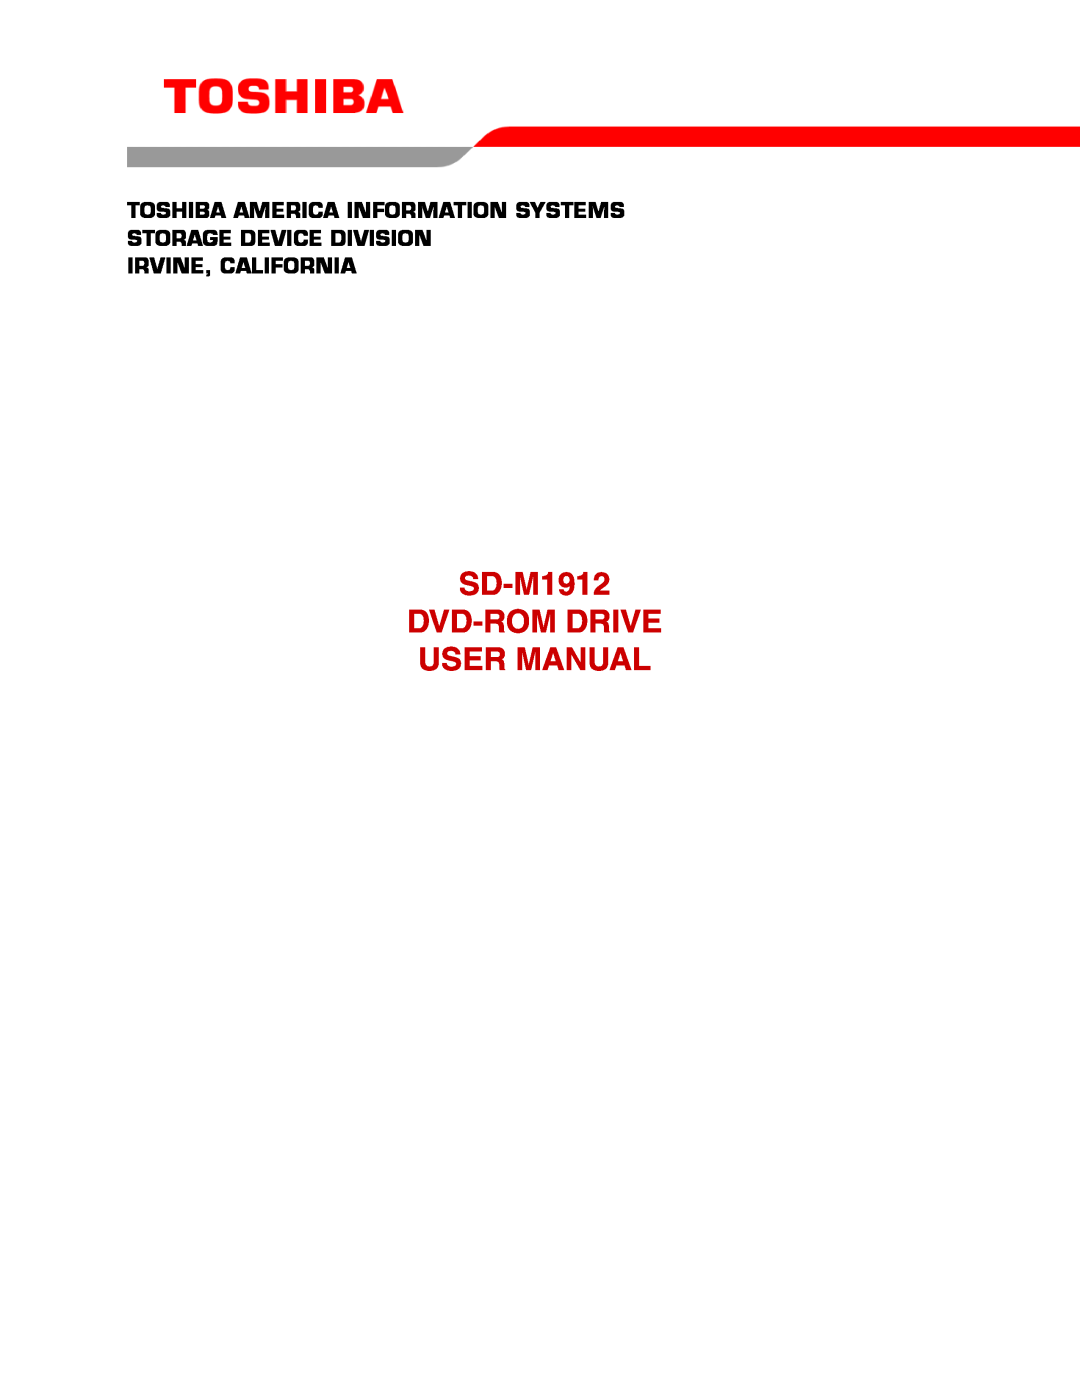 Toshiba user manual SD-M1912 DVD-ROM DRIVE USER MANUAL, Toshiba America Information Systems Storage Device Division 